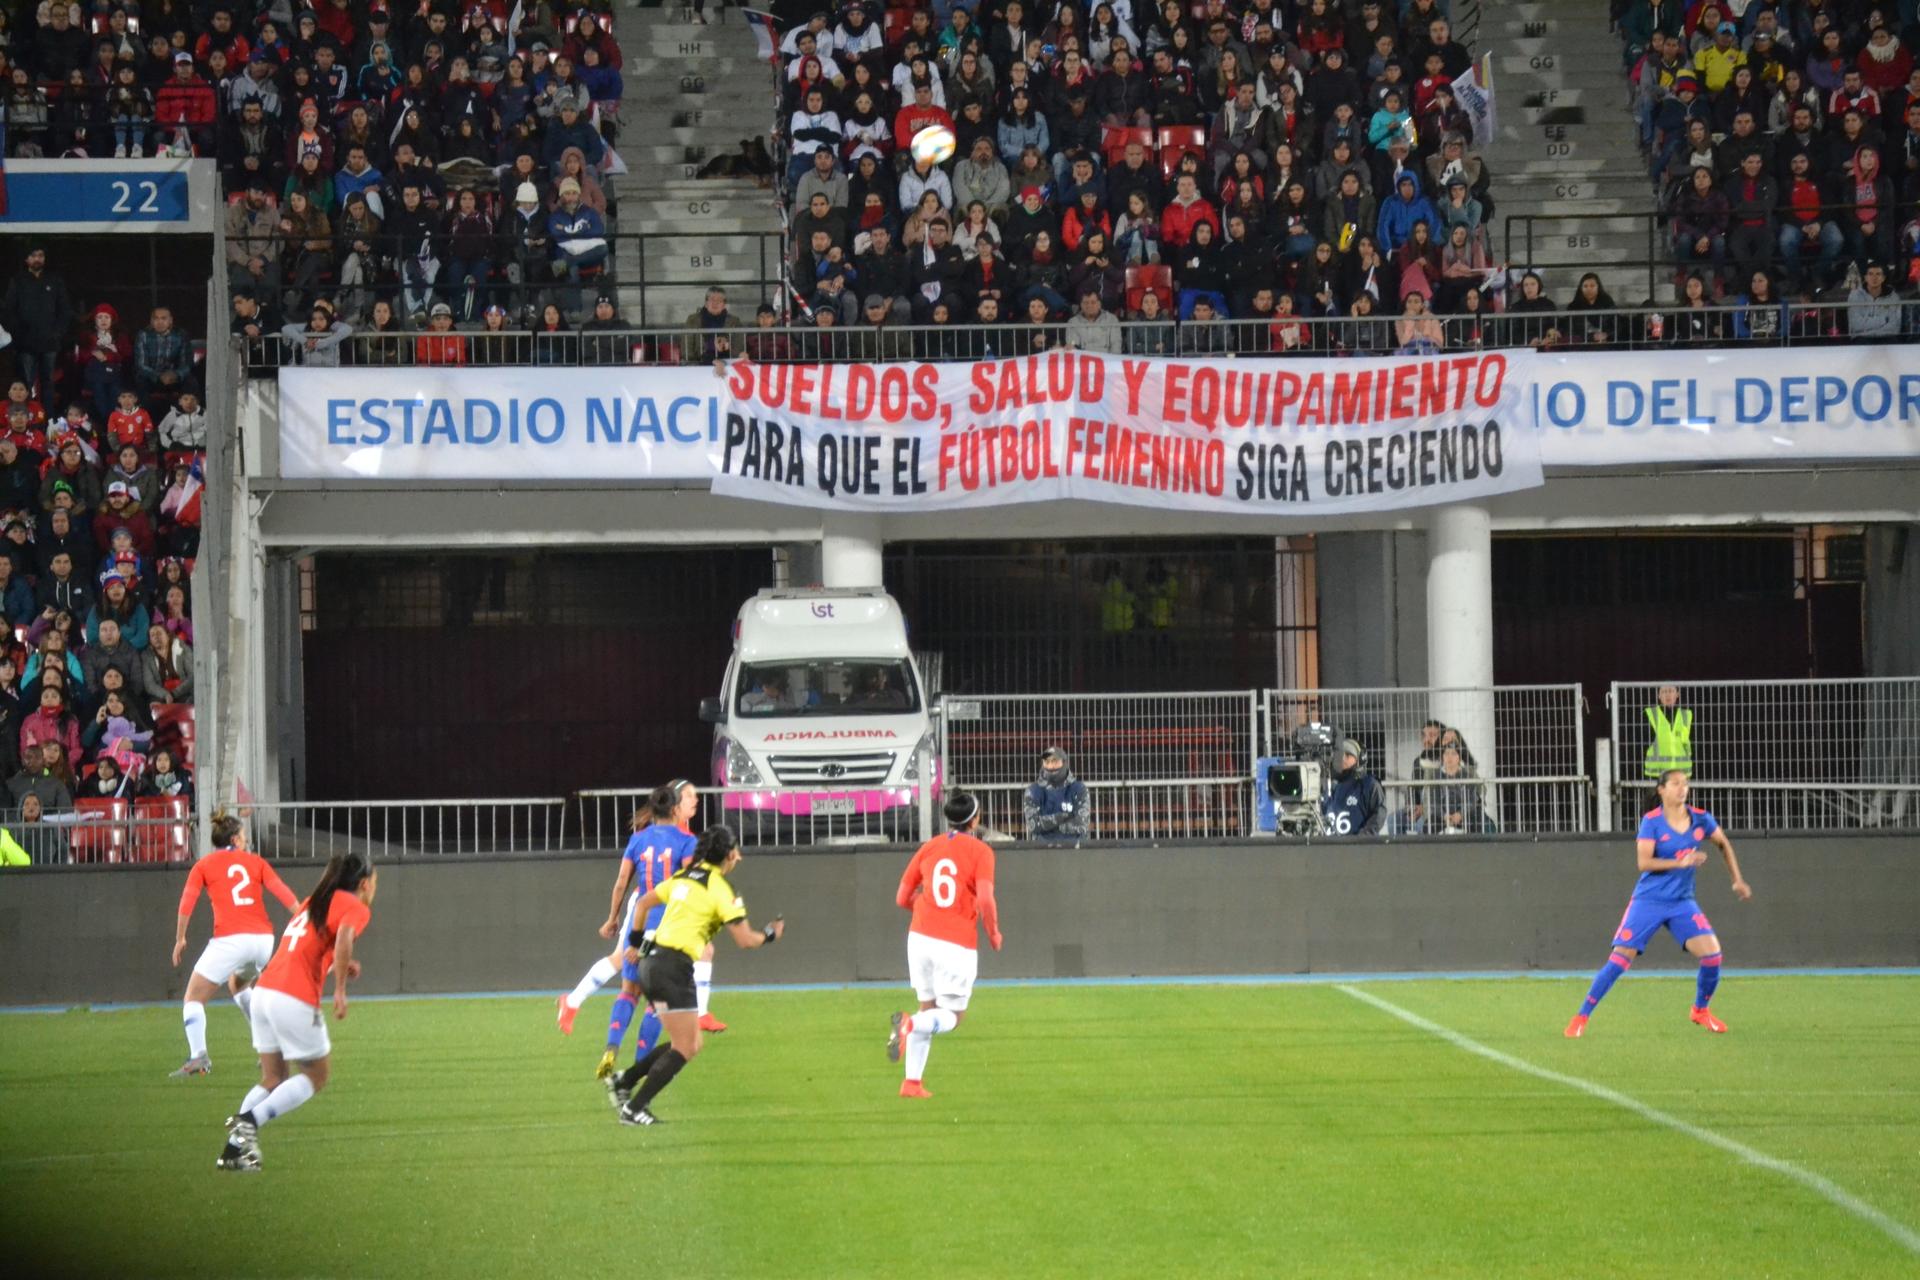 A sign on women's rights held in stadium during women's soccer match. 